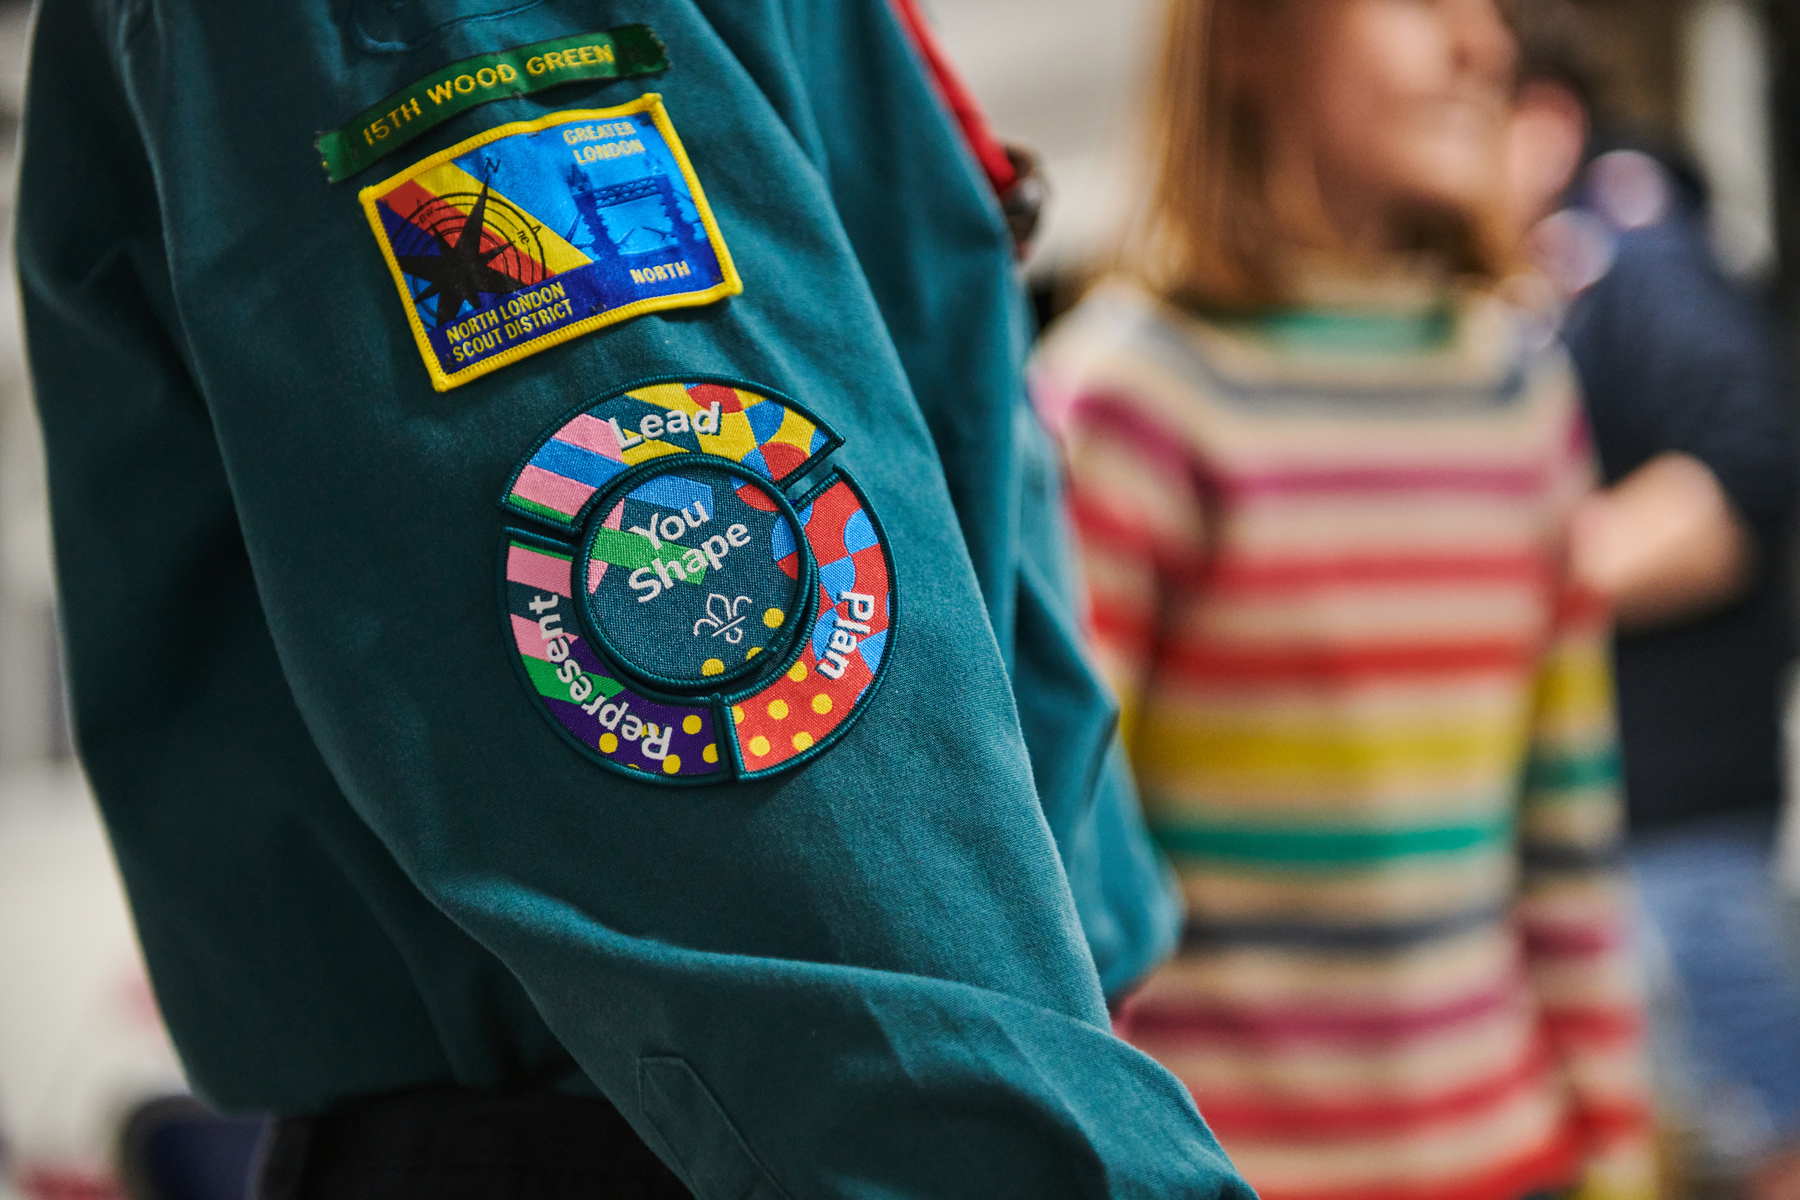 A picture of the Youshape award on a young person's uniform